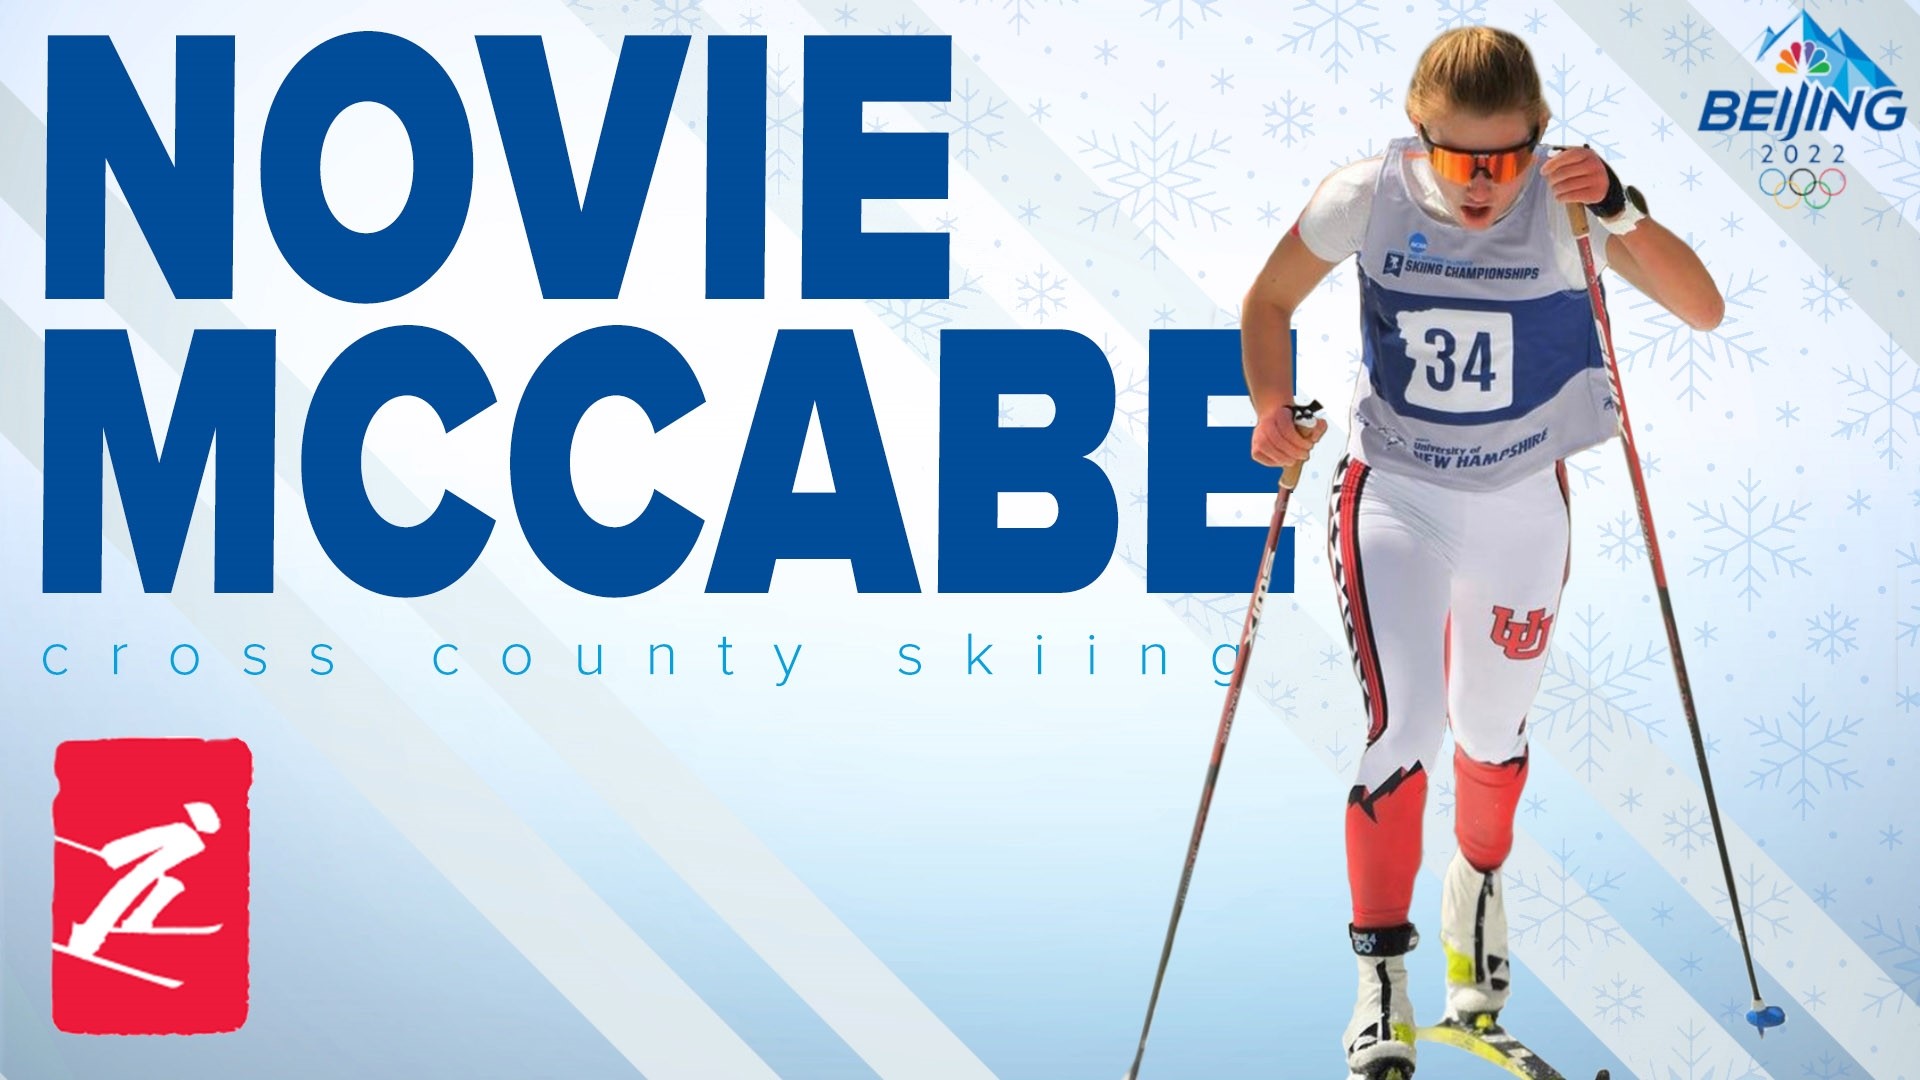 Novie McCabe made her World Cup debut in 2021 and was named to Team USA weeks later. She credits a lot of her success to her mom, who is also an Olympic athlete.